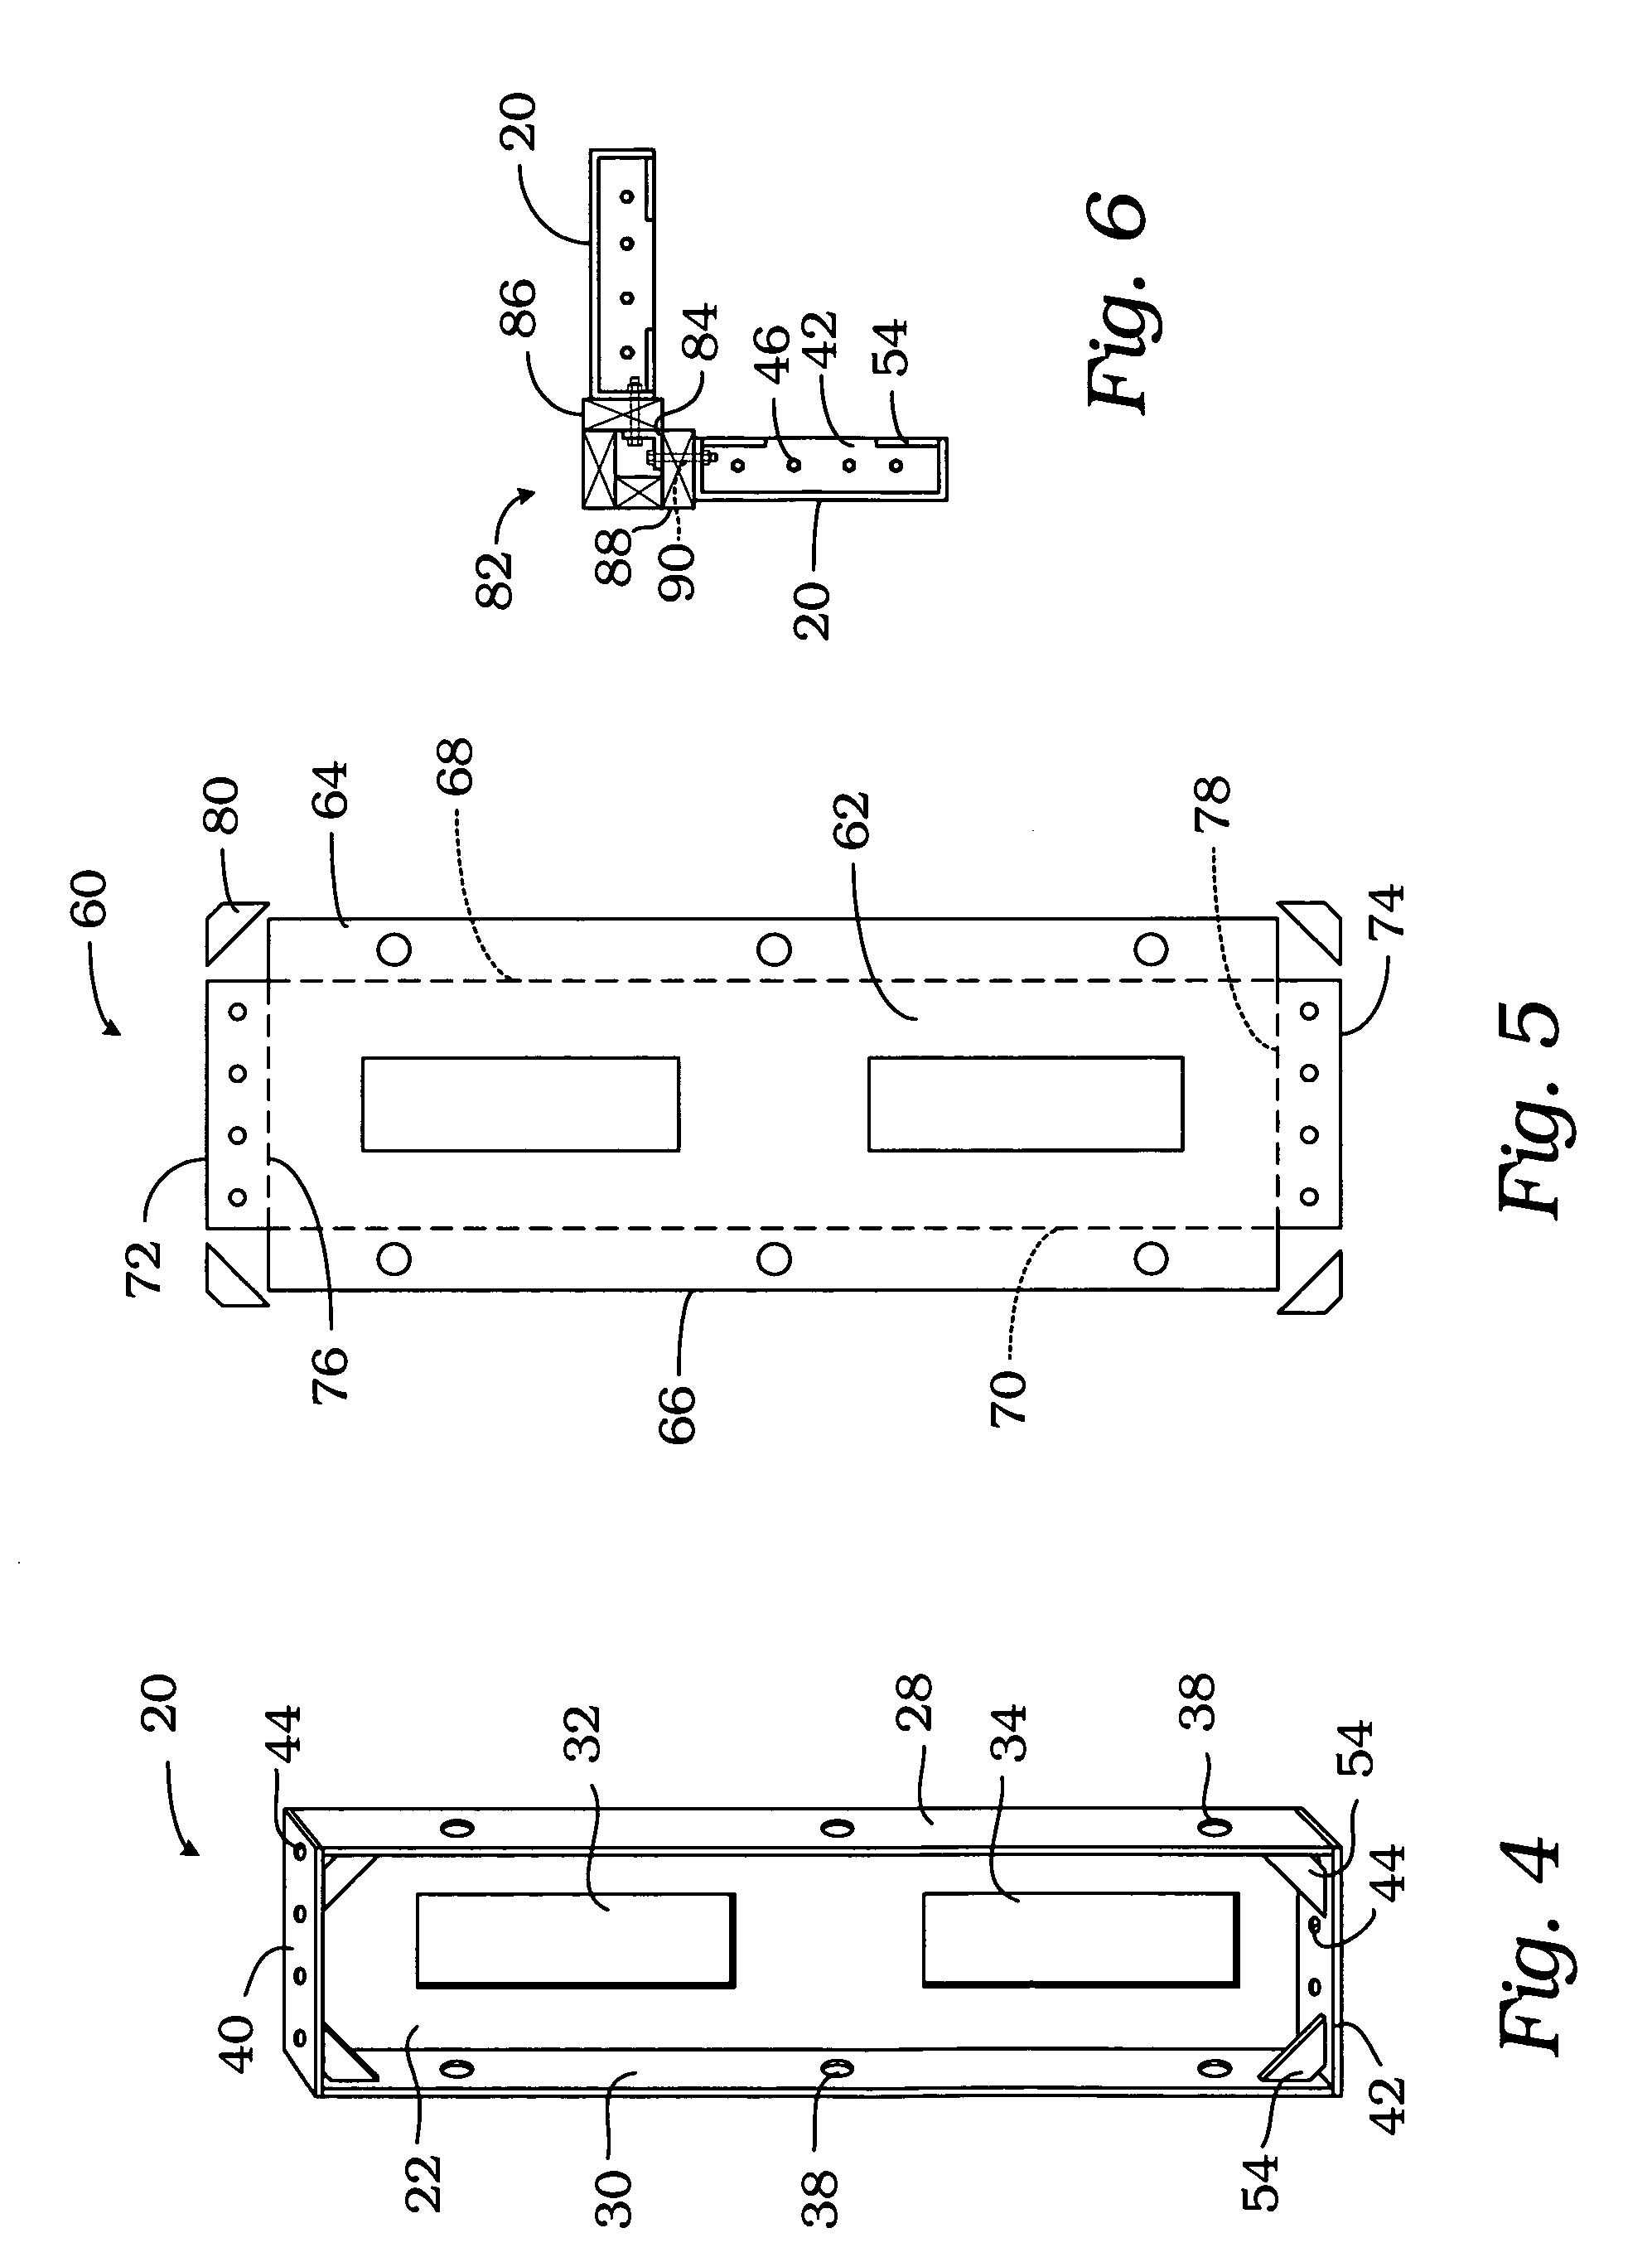 Structural reinforcing system components